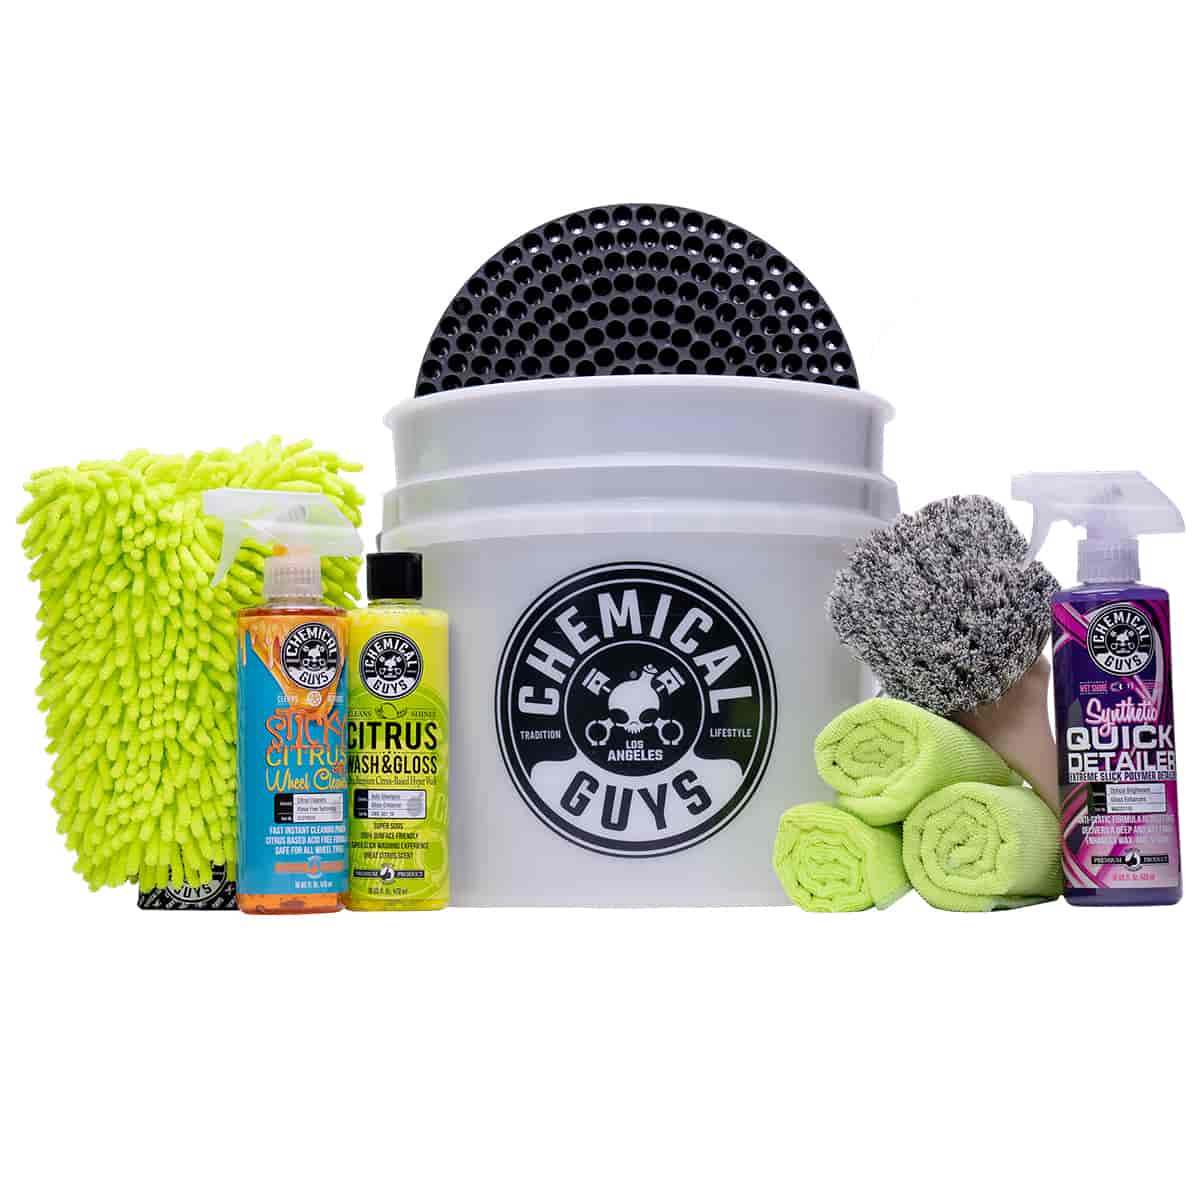 Chemical Guys ACC103K1: Detailing Easy Kit  Includes 4.5 Gallon Bucket  w/Dirt Trap, Microfiber Wash Mitt, Citrus Concentrated Car Wash, Gel Citrus  Wheel Cleaner, Extreme Slick Synthetic Quick Detailer, Flagged Tip Brush